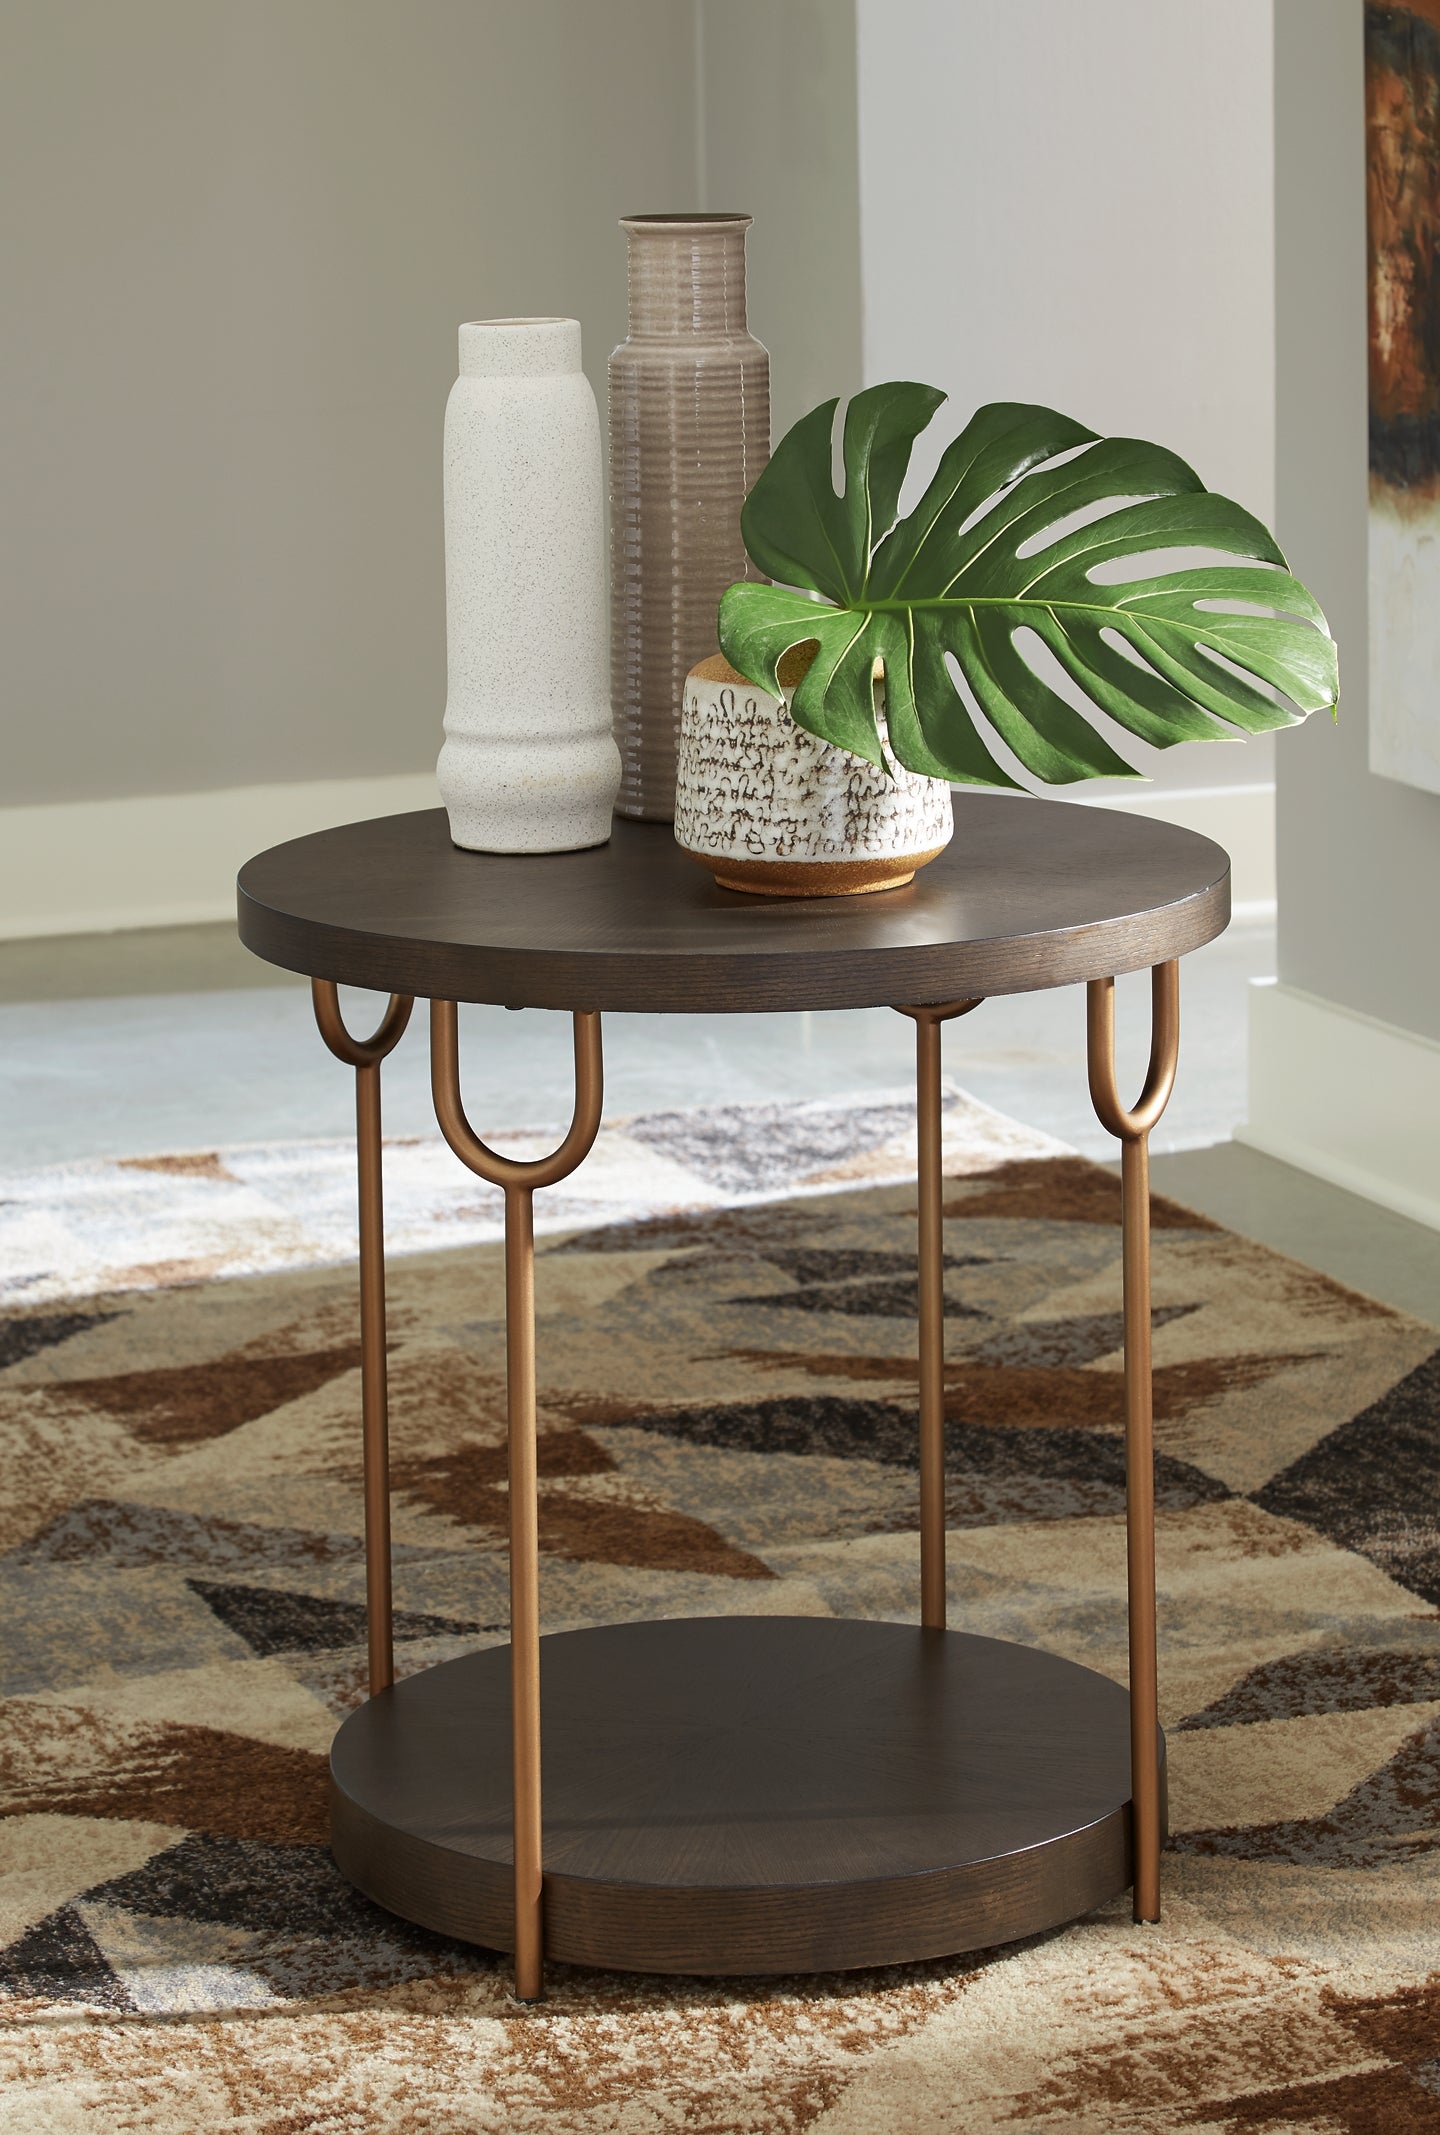 Brazburn Coffee Table with 2 End Tables Wilson Furniture (OH)  in Bridgeport, Ohio. Serving Bridgeport, Yorkville, Bellaire, & Avondale